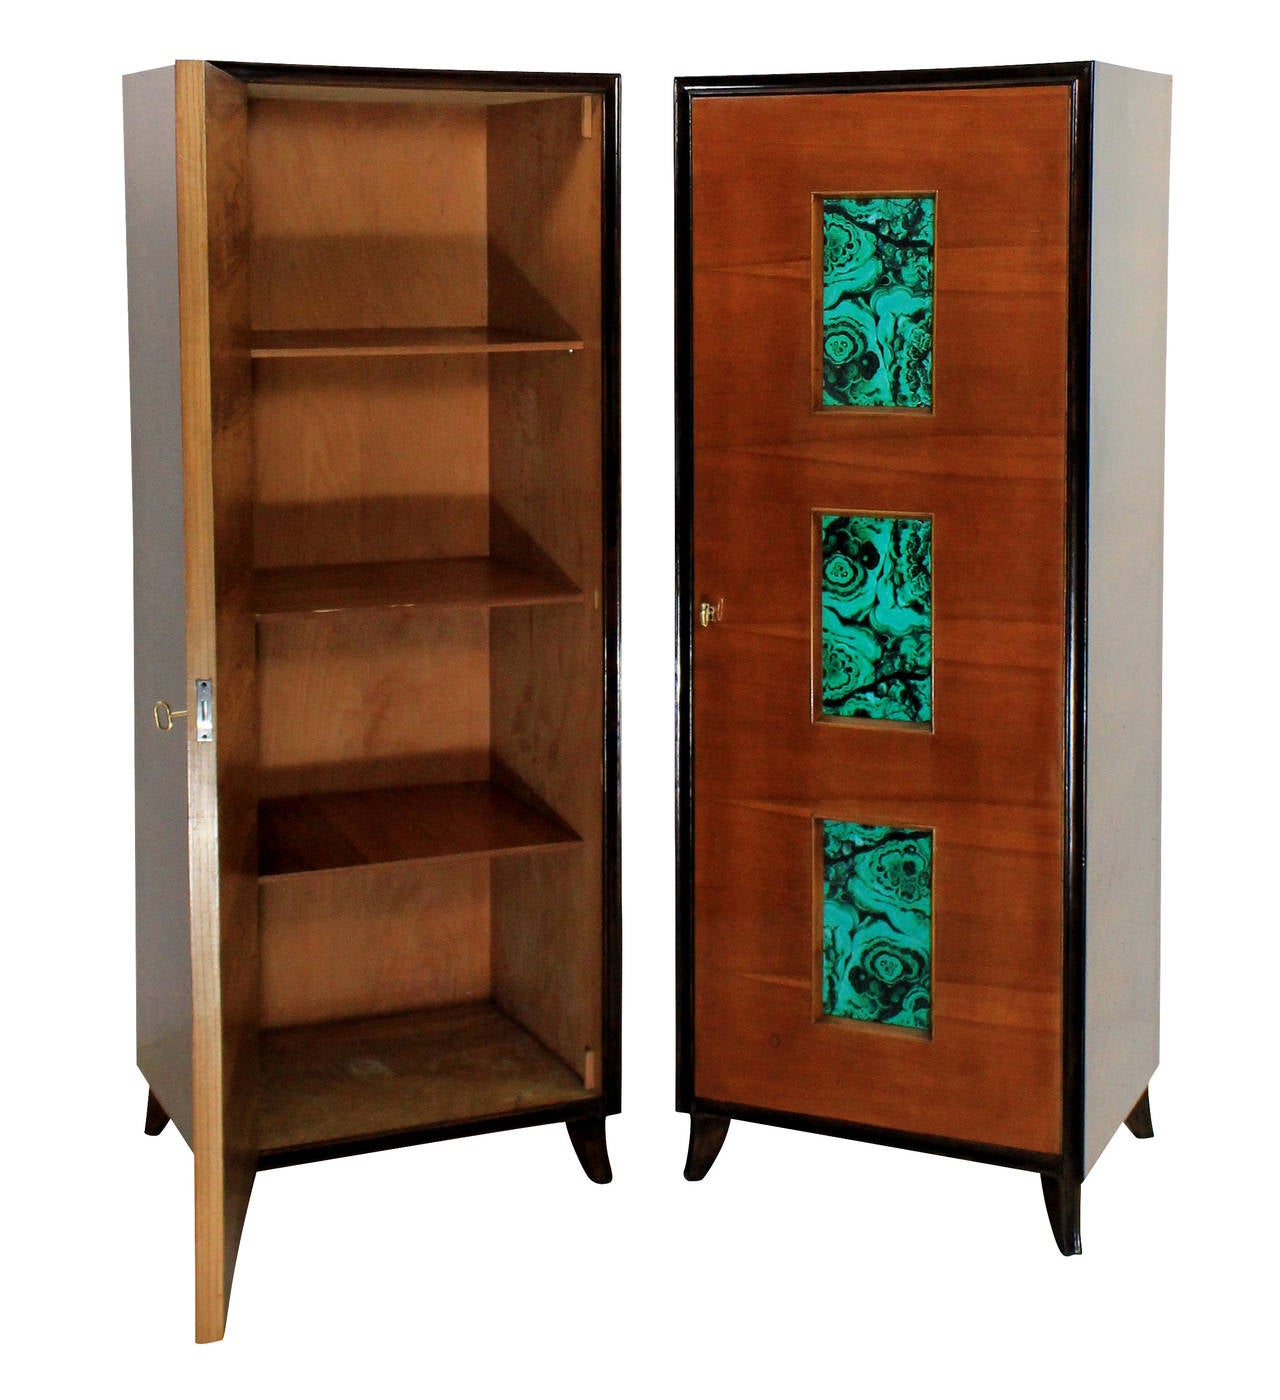 A pair of stylish Italian wardrobes in sapele wood of contrasting colours, with faux malachite glazed panels. On curved feet, with original keys, one cupboard contains shelves the other a hanger.